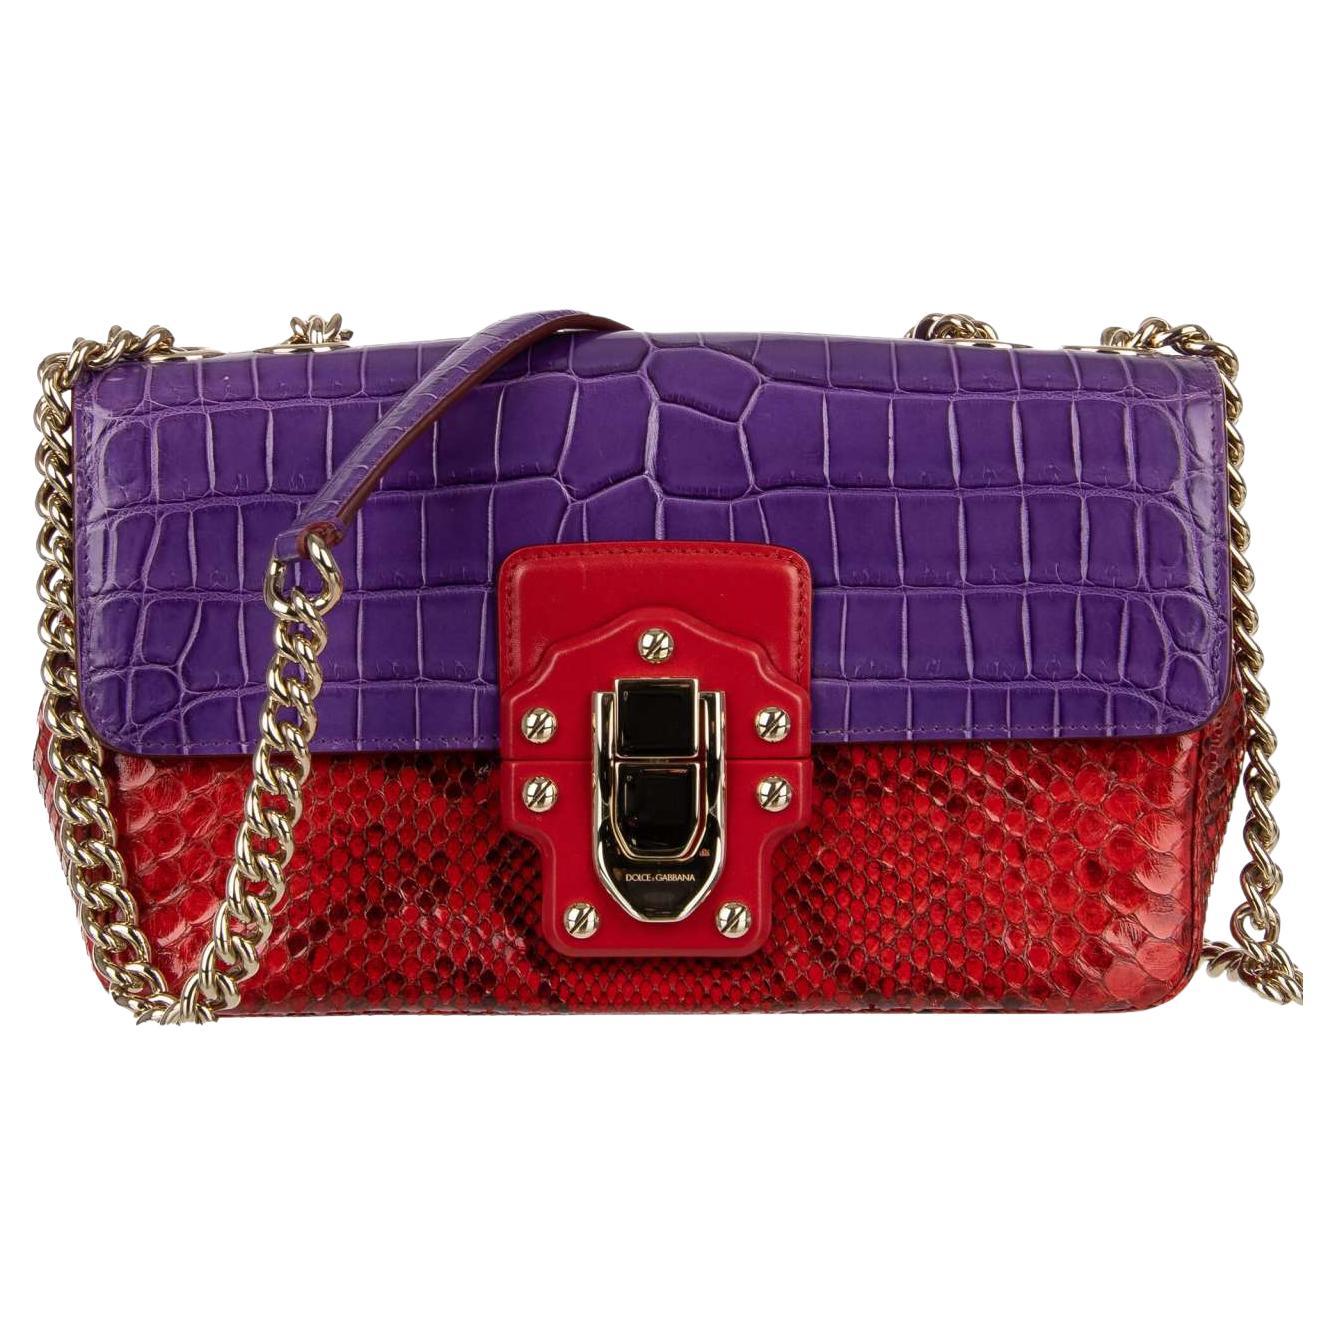 D&G Croco Snake Leather Shoulder Bag LUCIA with Chain Strap Red Purple For Sale